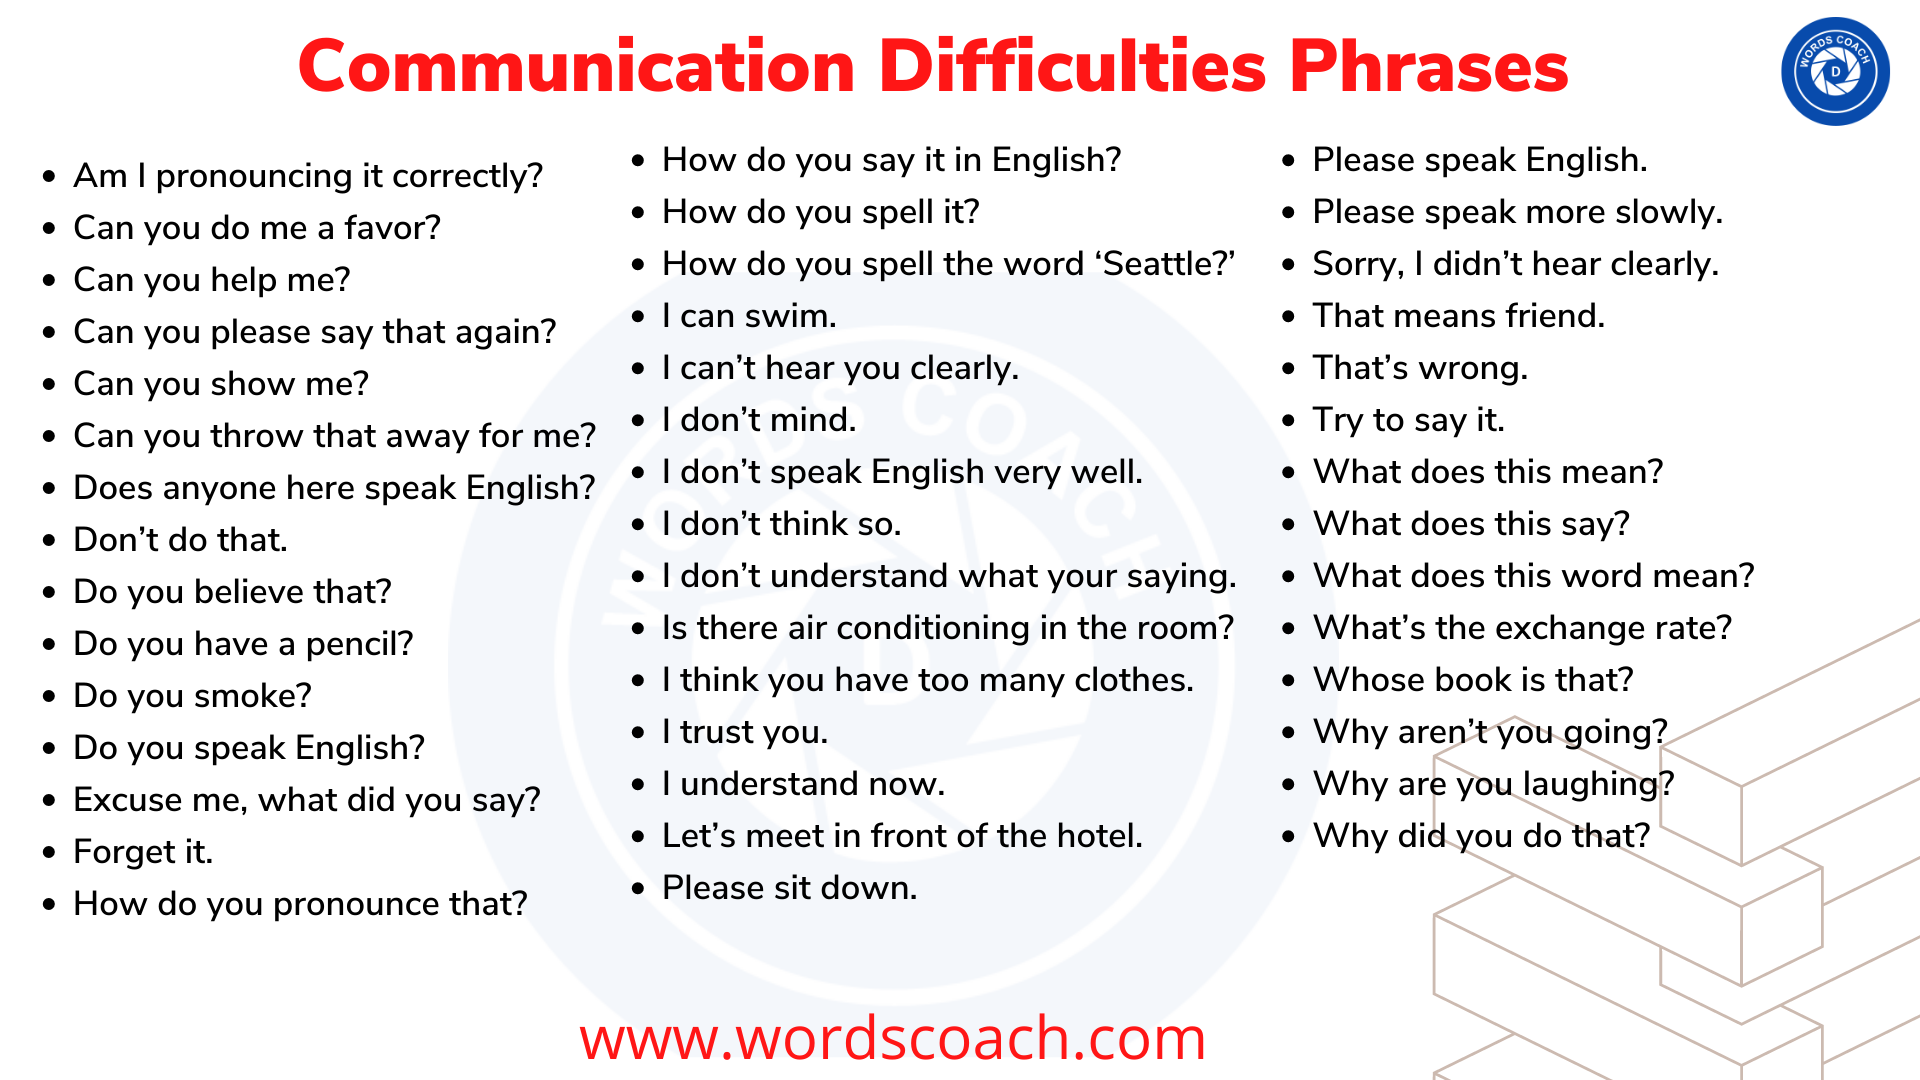 Communication Difficulties Phrases